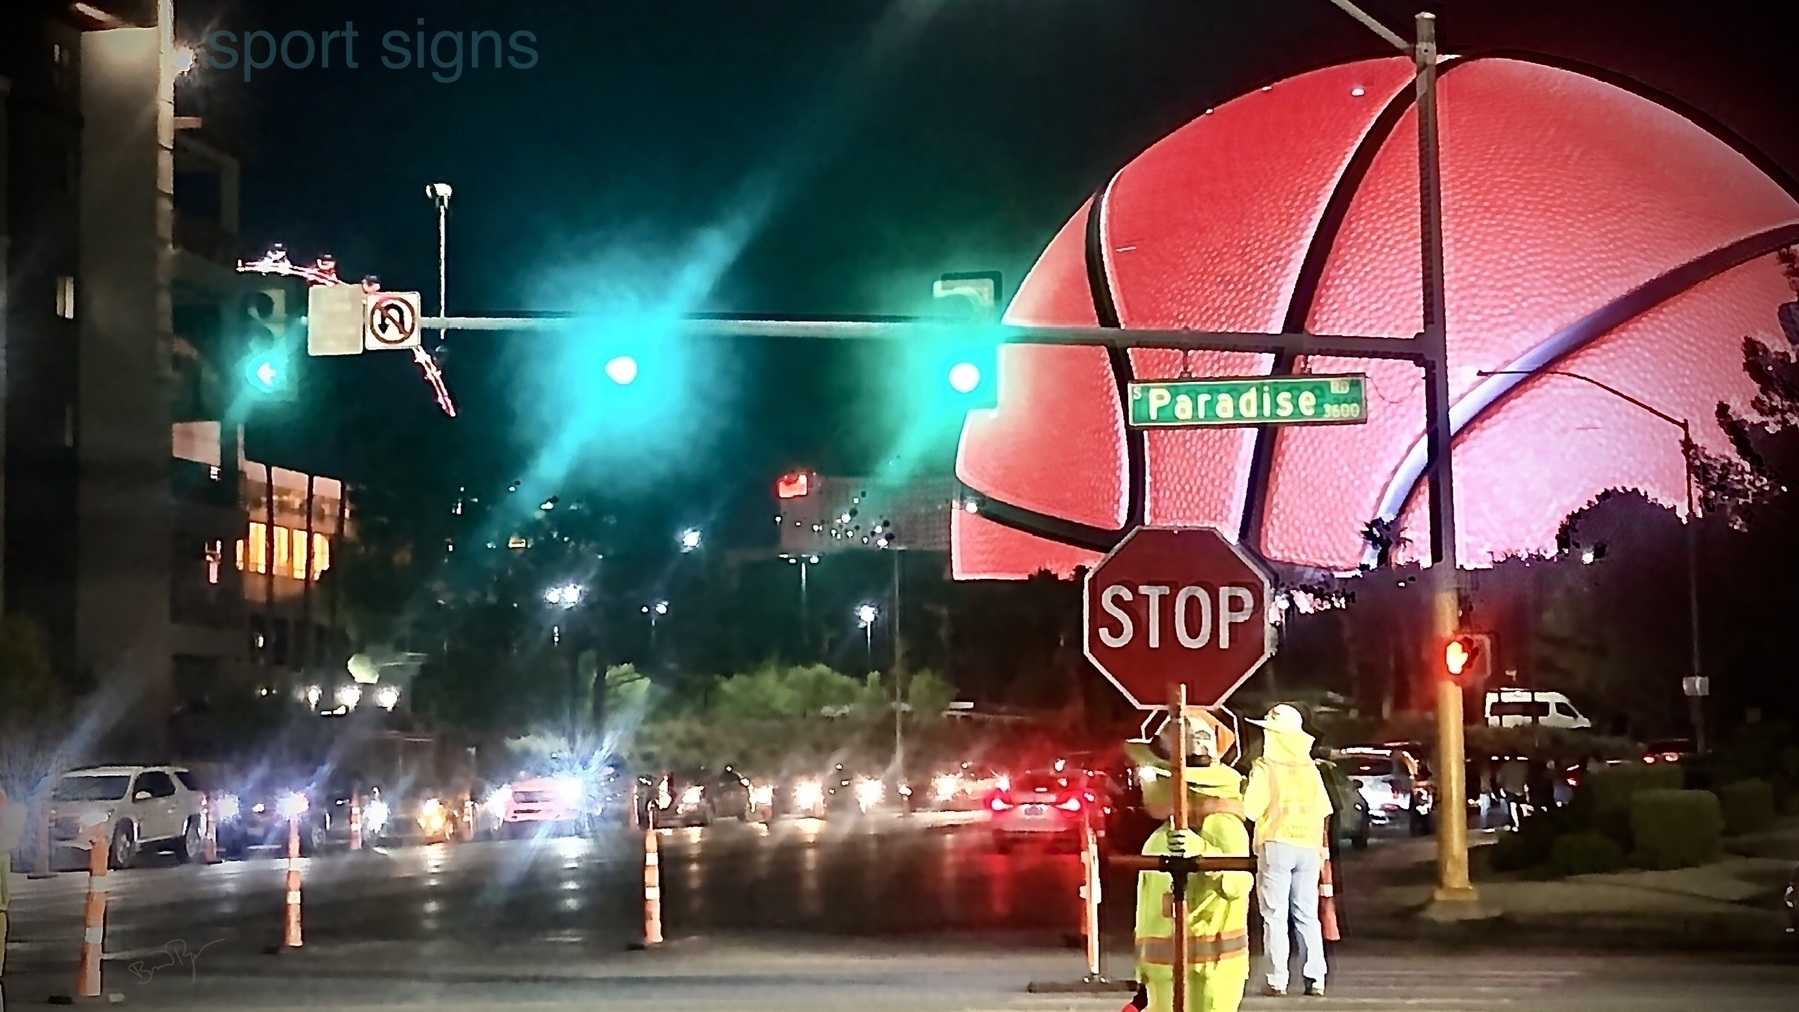 MSG Sphere, Paradise, stop sign